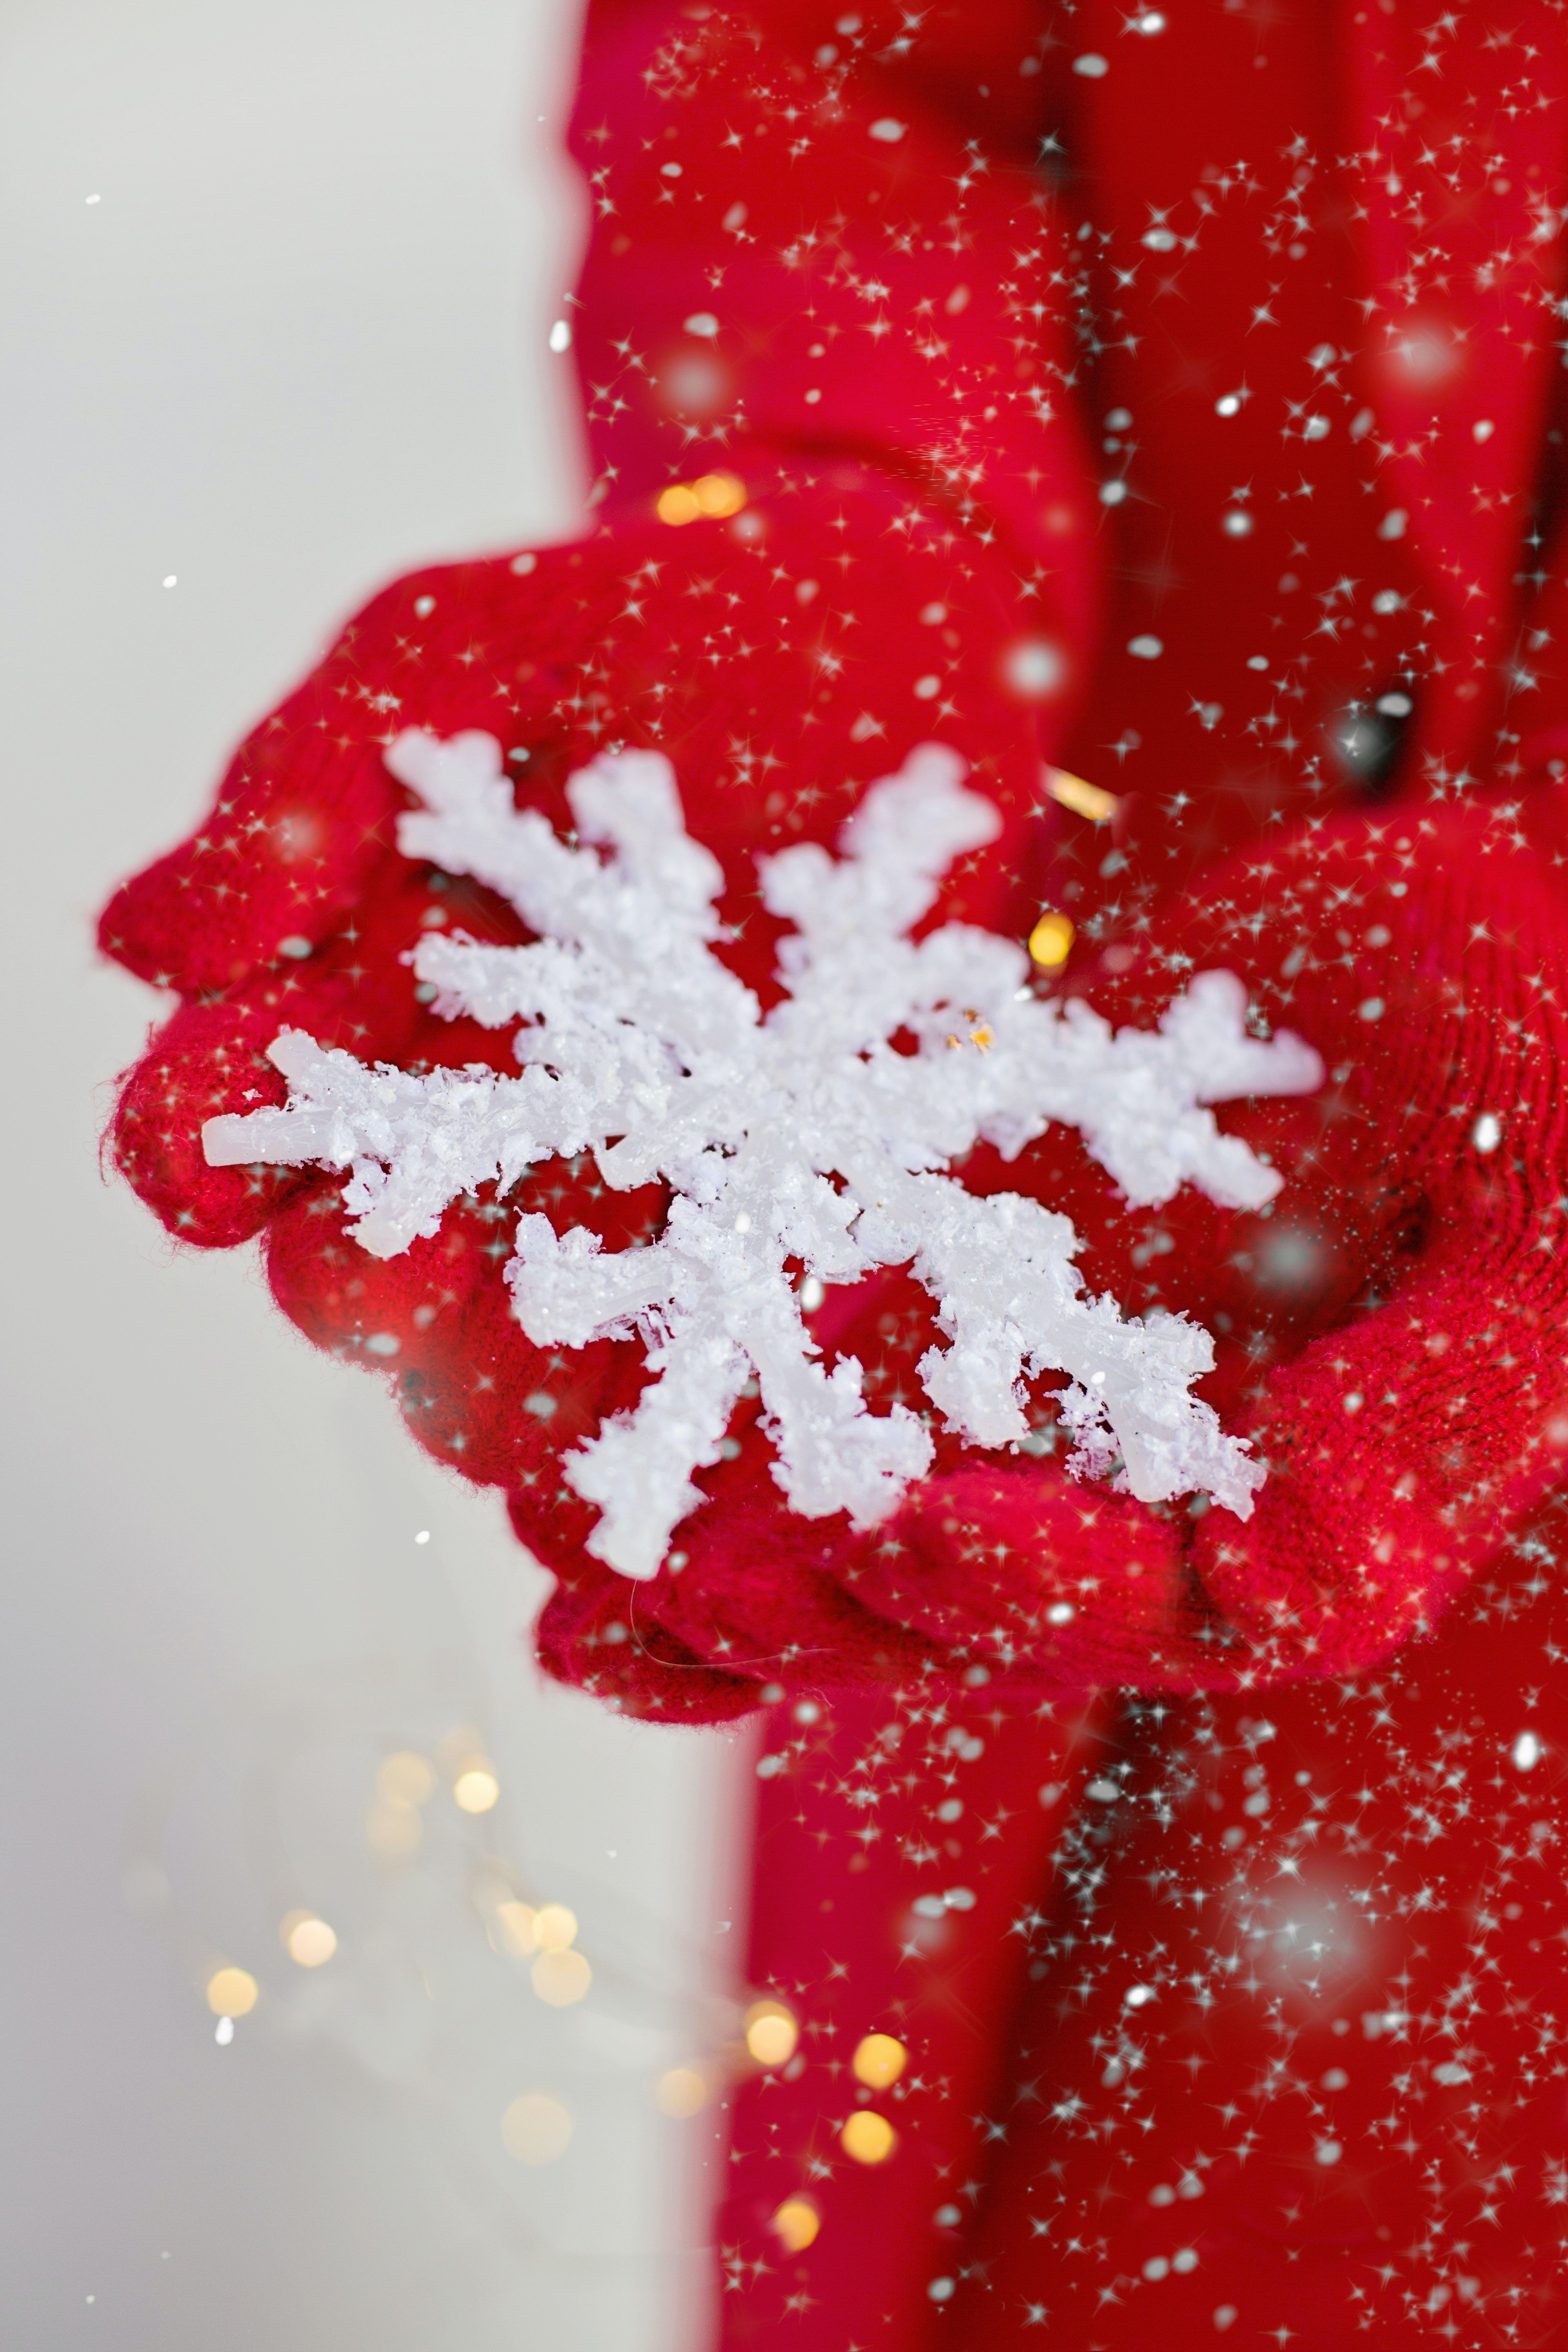 A woman's hands in red gloves holding a large snowflake - Snowflake, cute Christmas